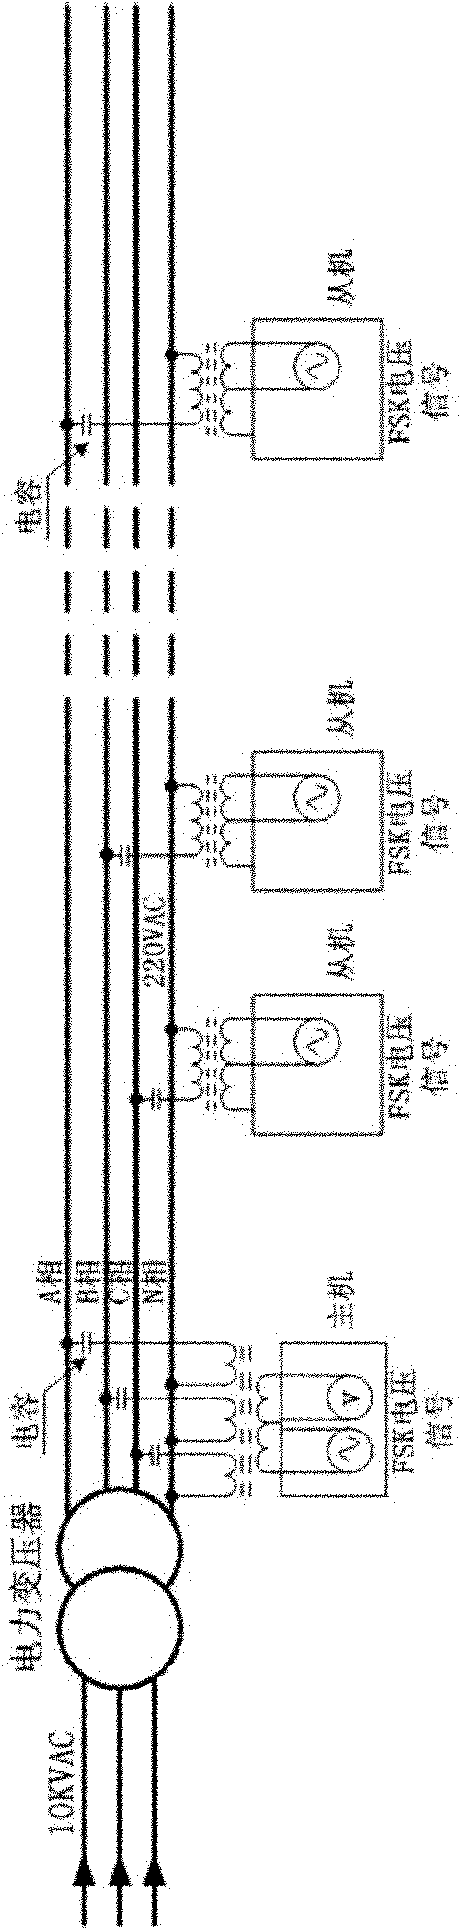 Asymmetrical carrier communication system of electric energy meter